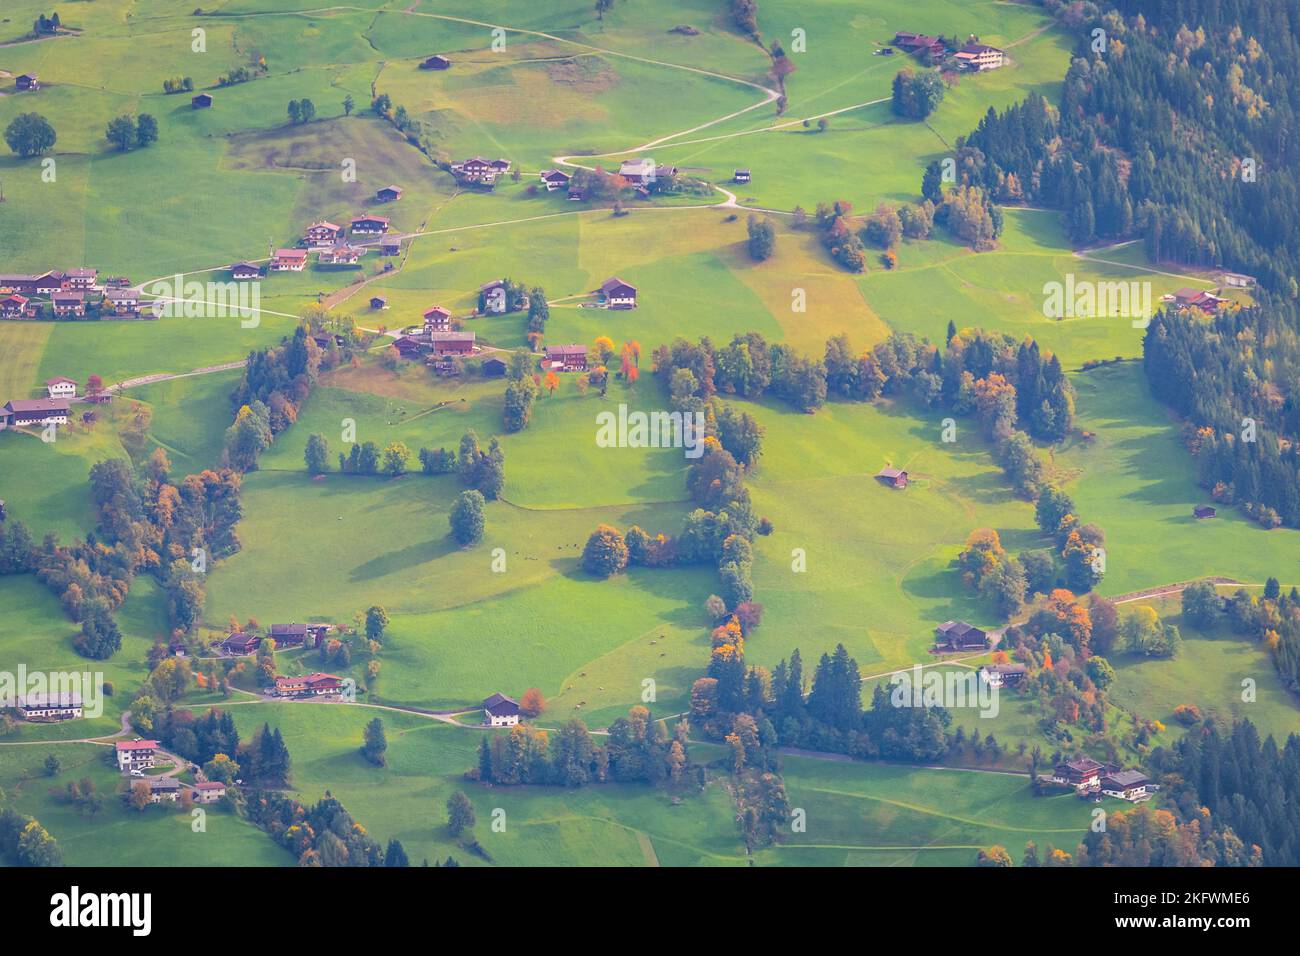 Above Zillertal valley, Tyrol alps, meadows and villages, Austria Stock Photo